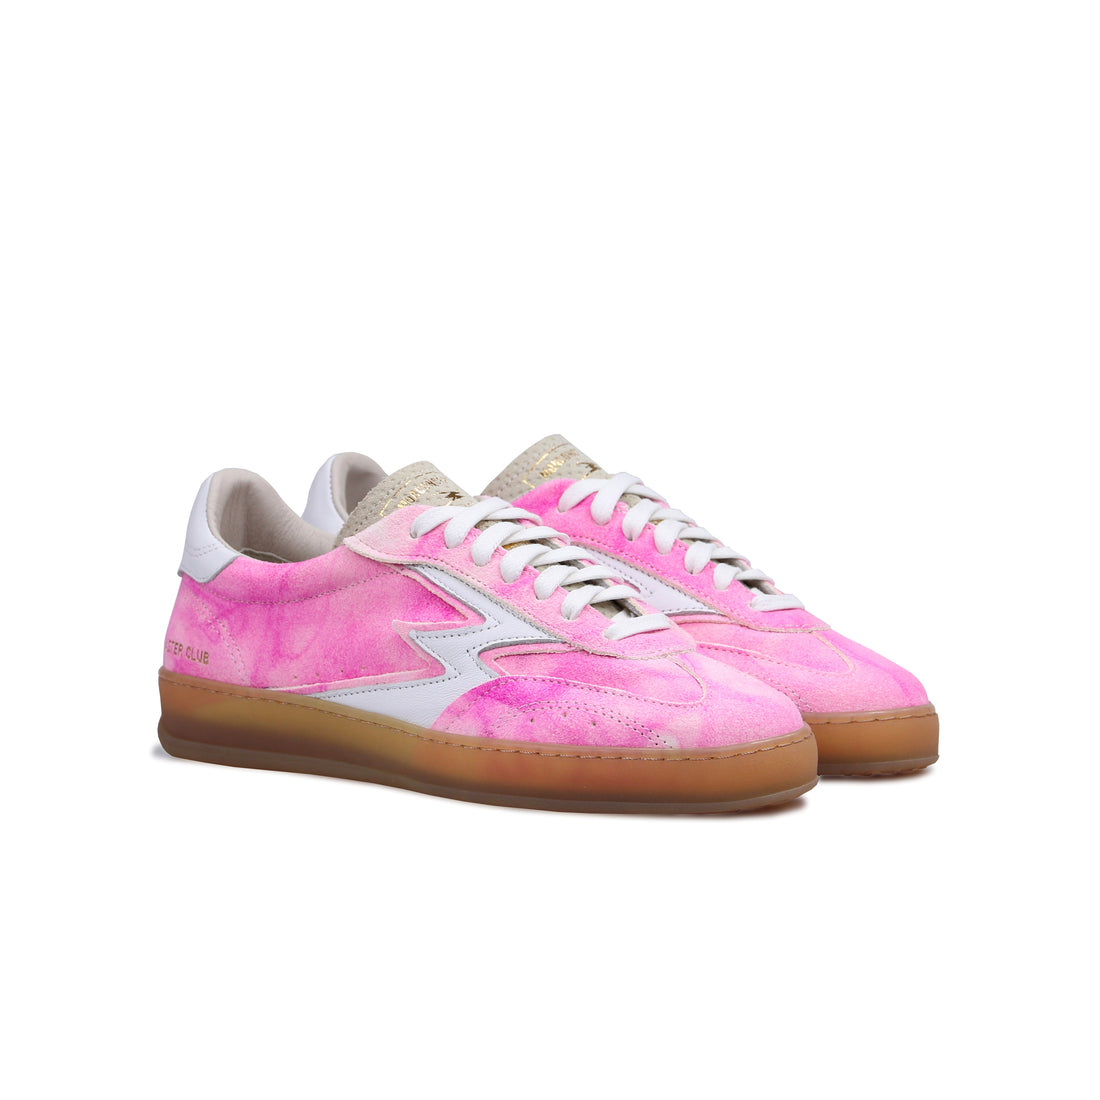 Club Rosa sneaker with white leather details